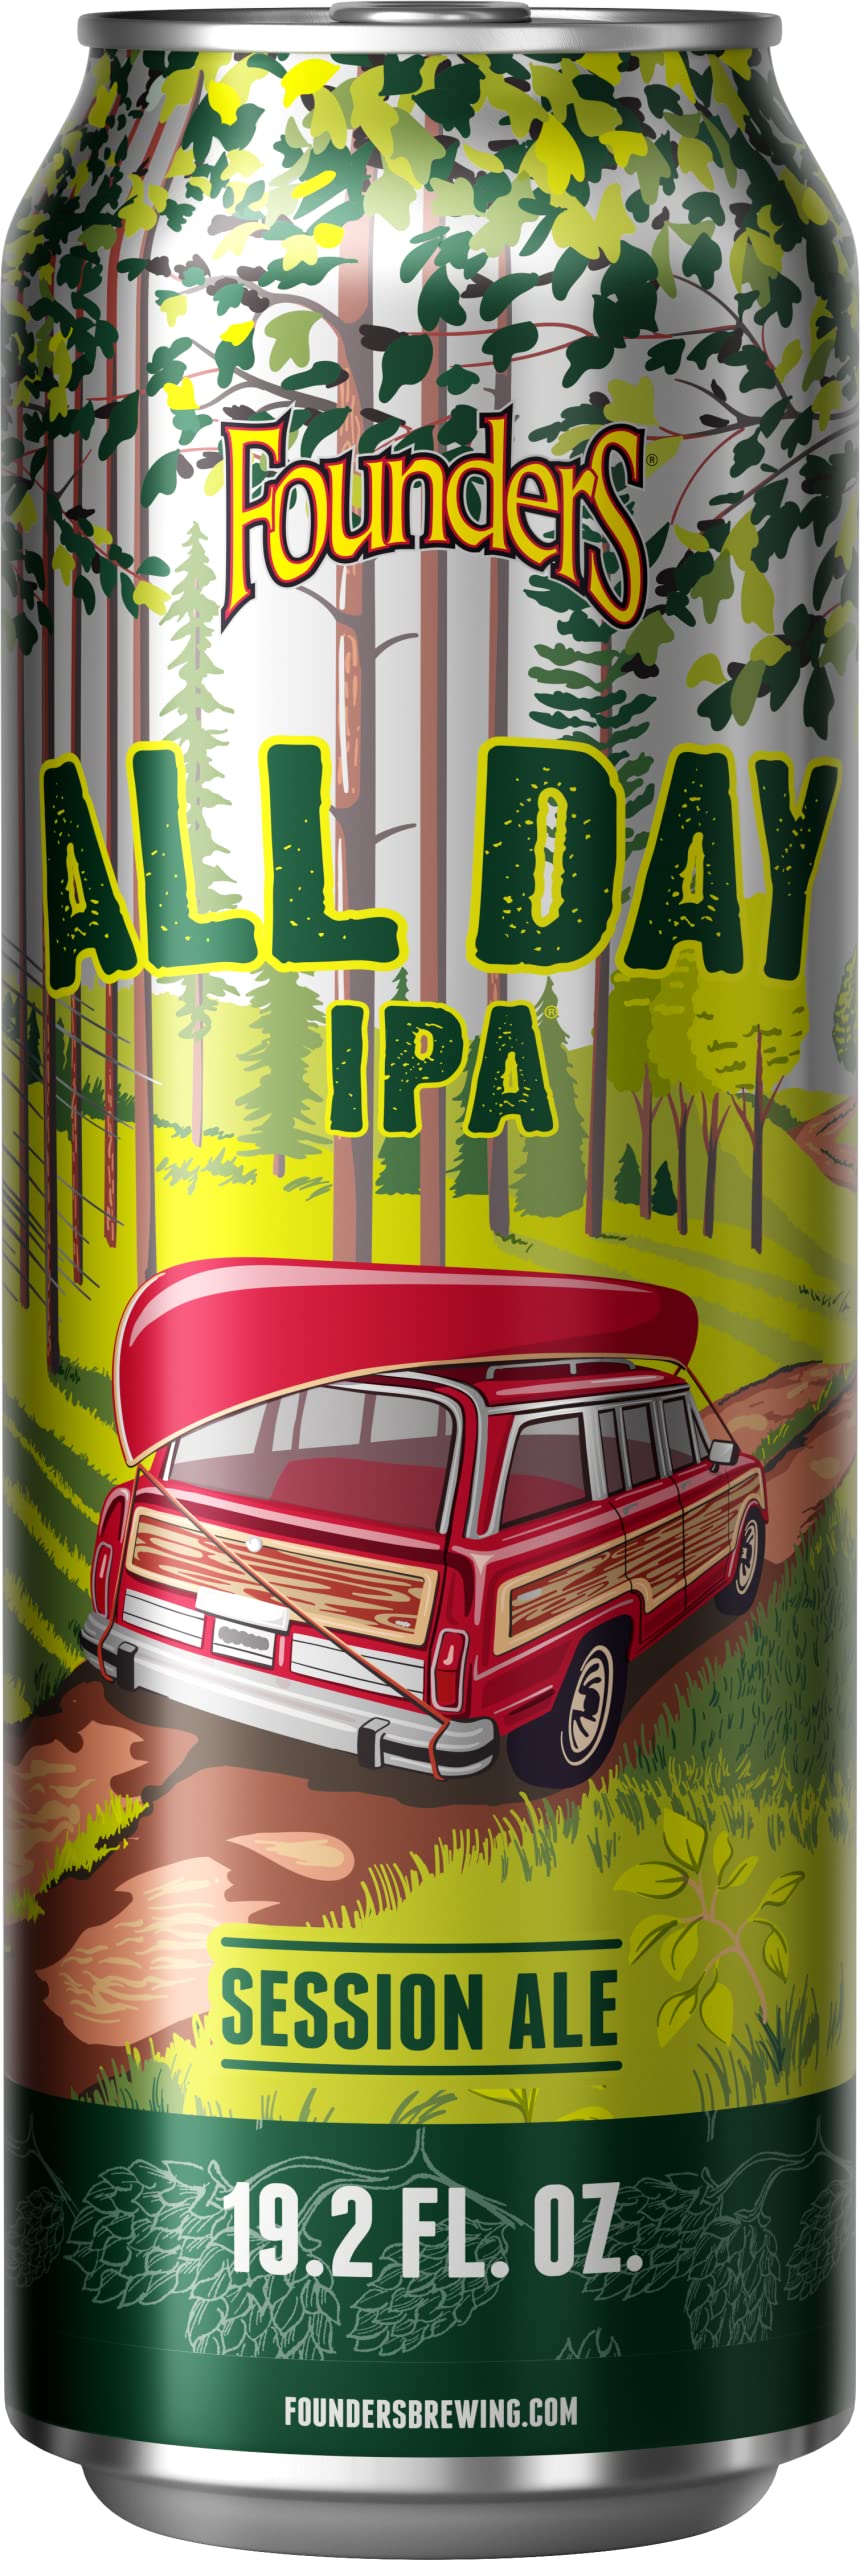 Founders All Day IPA 19.2oz 4.7% abv